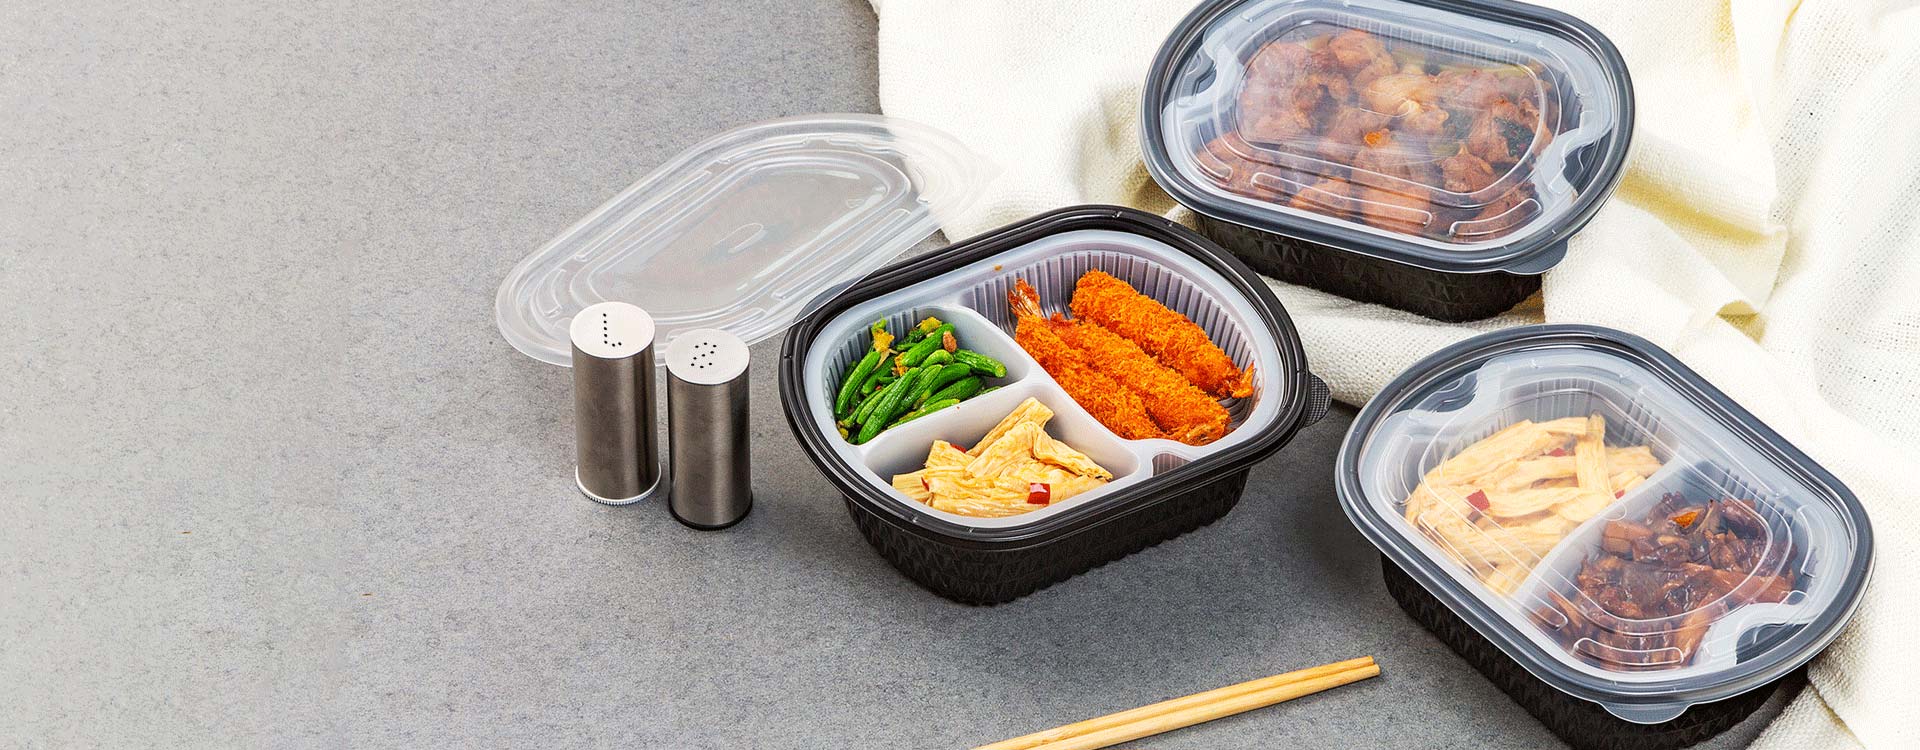 Microwave Safe Containers Round Food Bowl Salad Disposable Small Plastic  Containers with Lids - China Lunch Box and Disposable Plastic Container  price